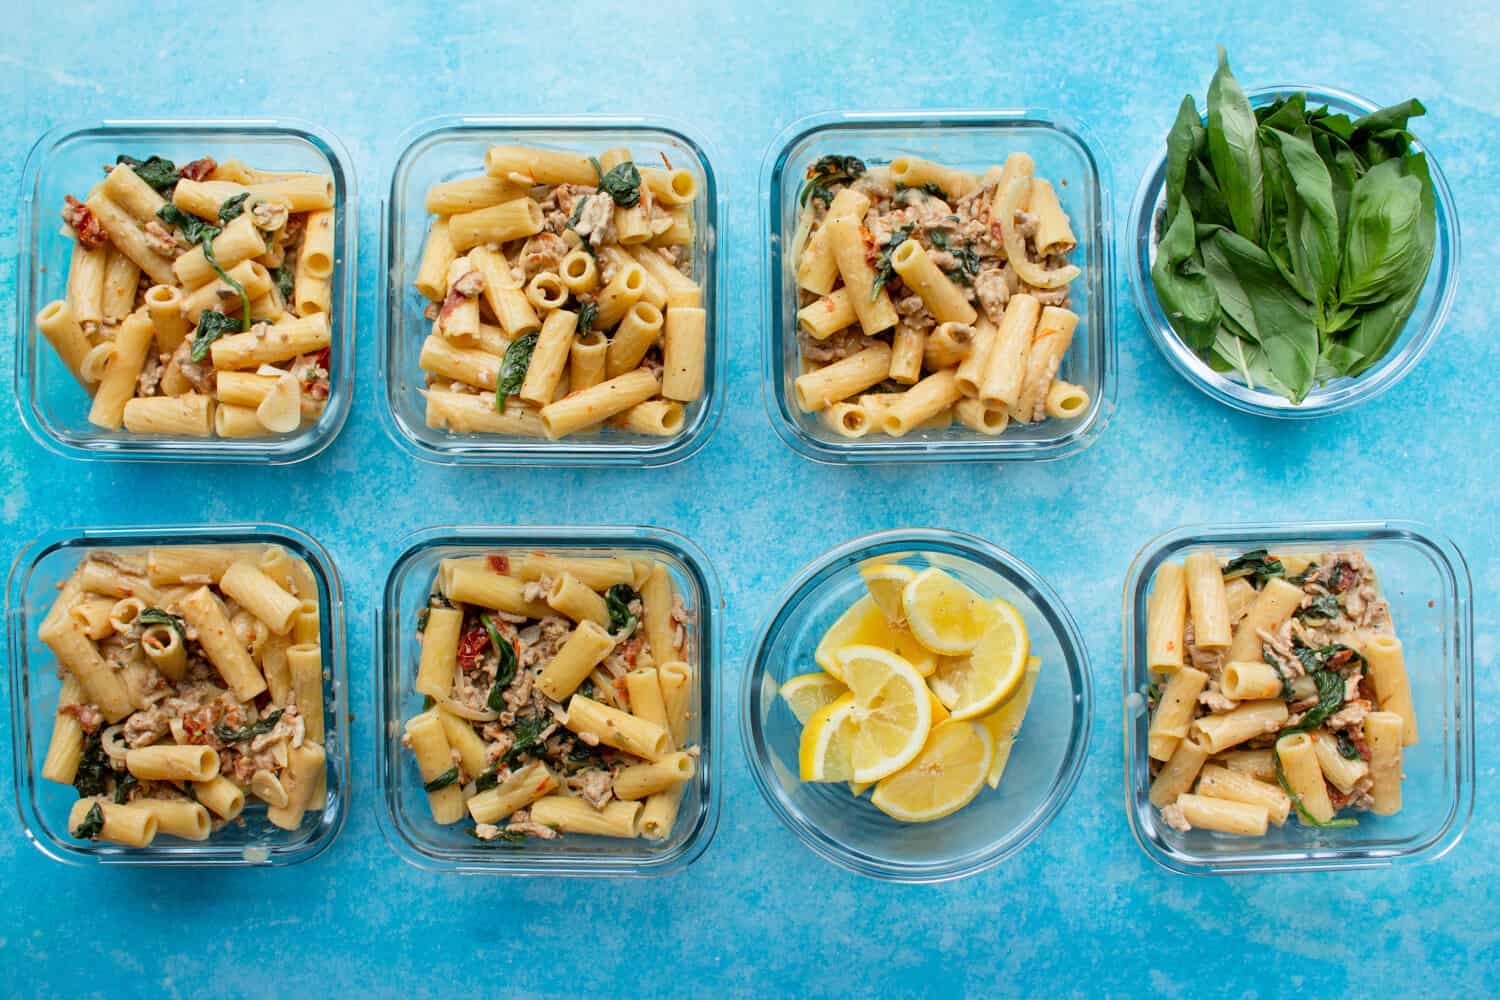 6 square glass meal prep containers with Tuscan inspired rigatoni with pork mince and 2 round glass bowls with lemon wedges and fresh basil.